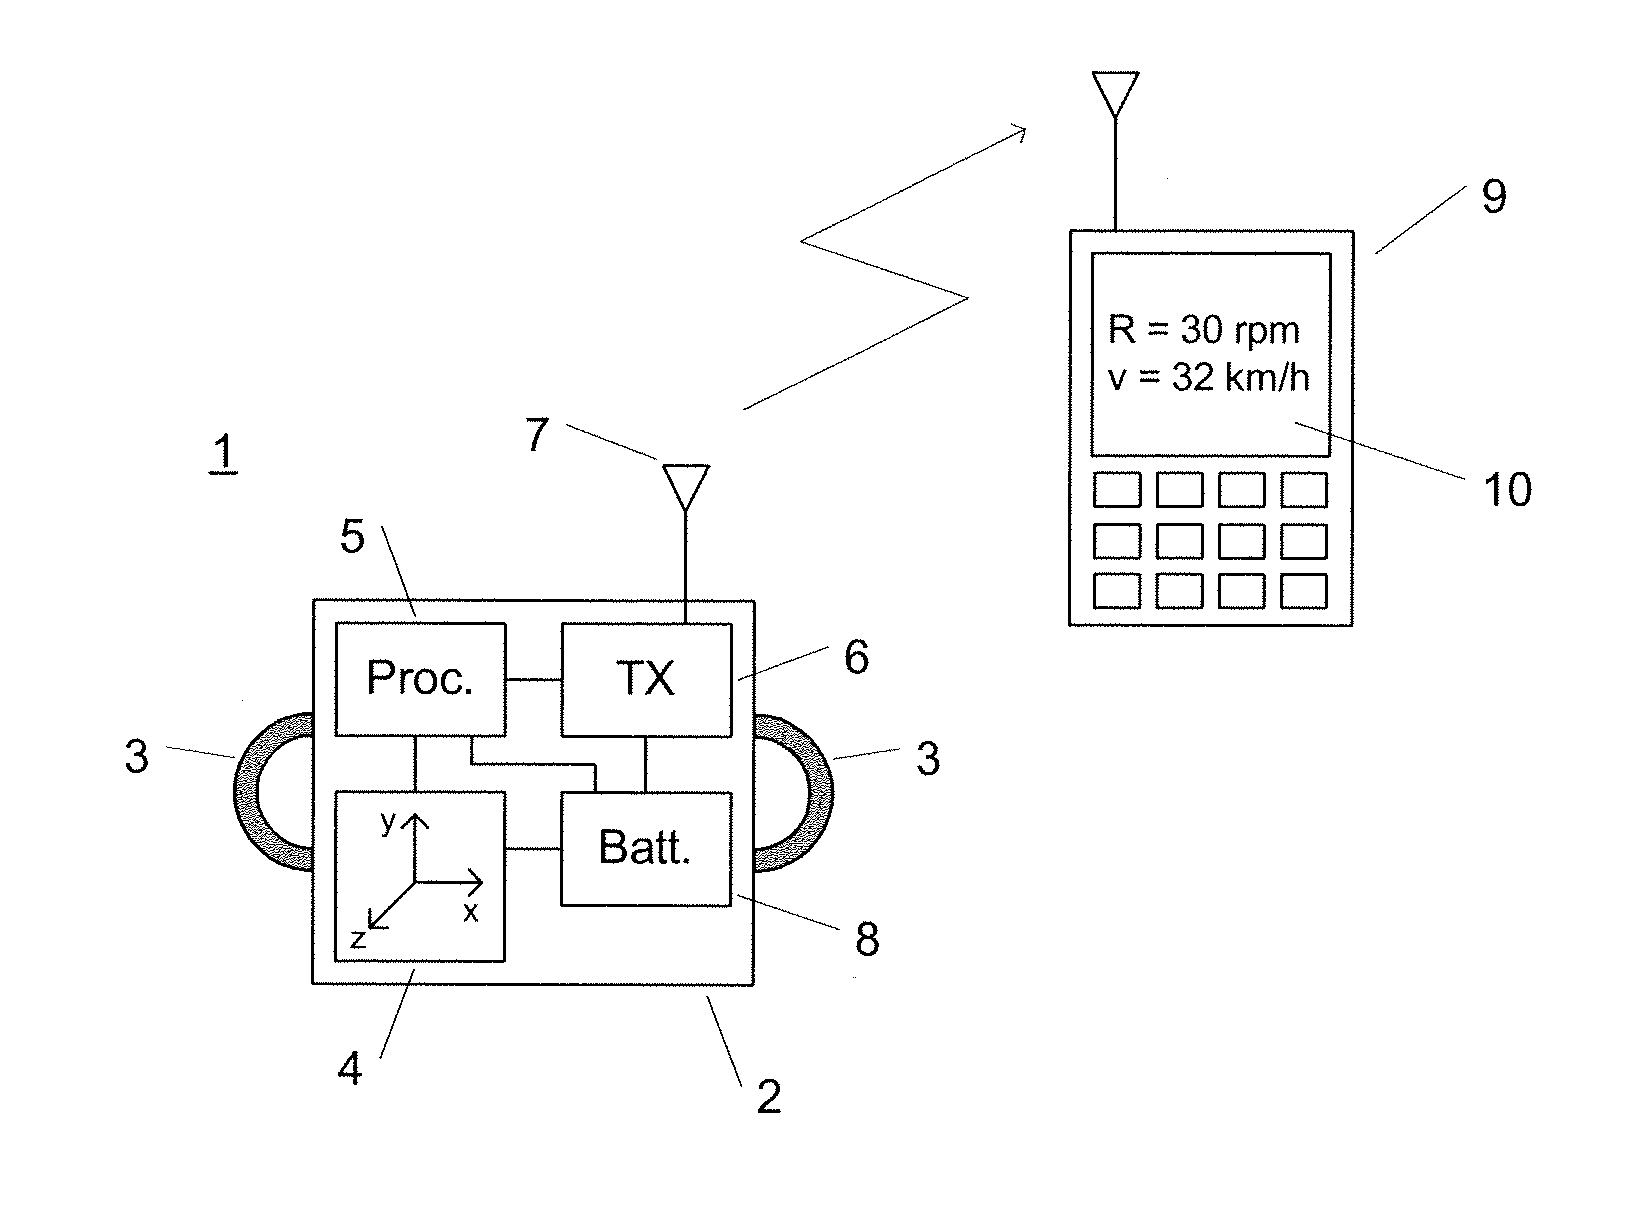 Sensor apparatus and method for determining pedalling cadence and travelling speed of a bicycle